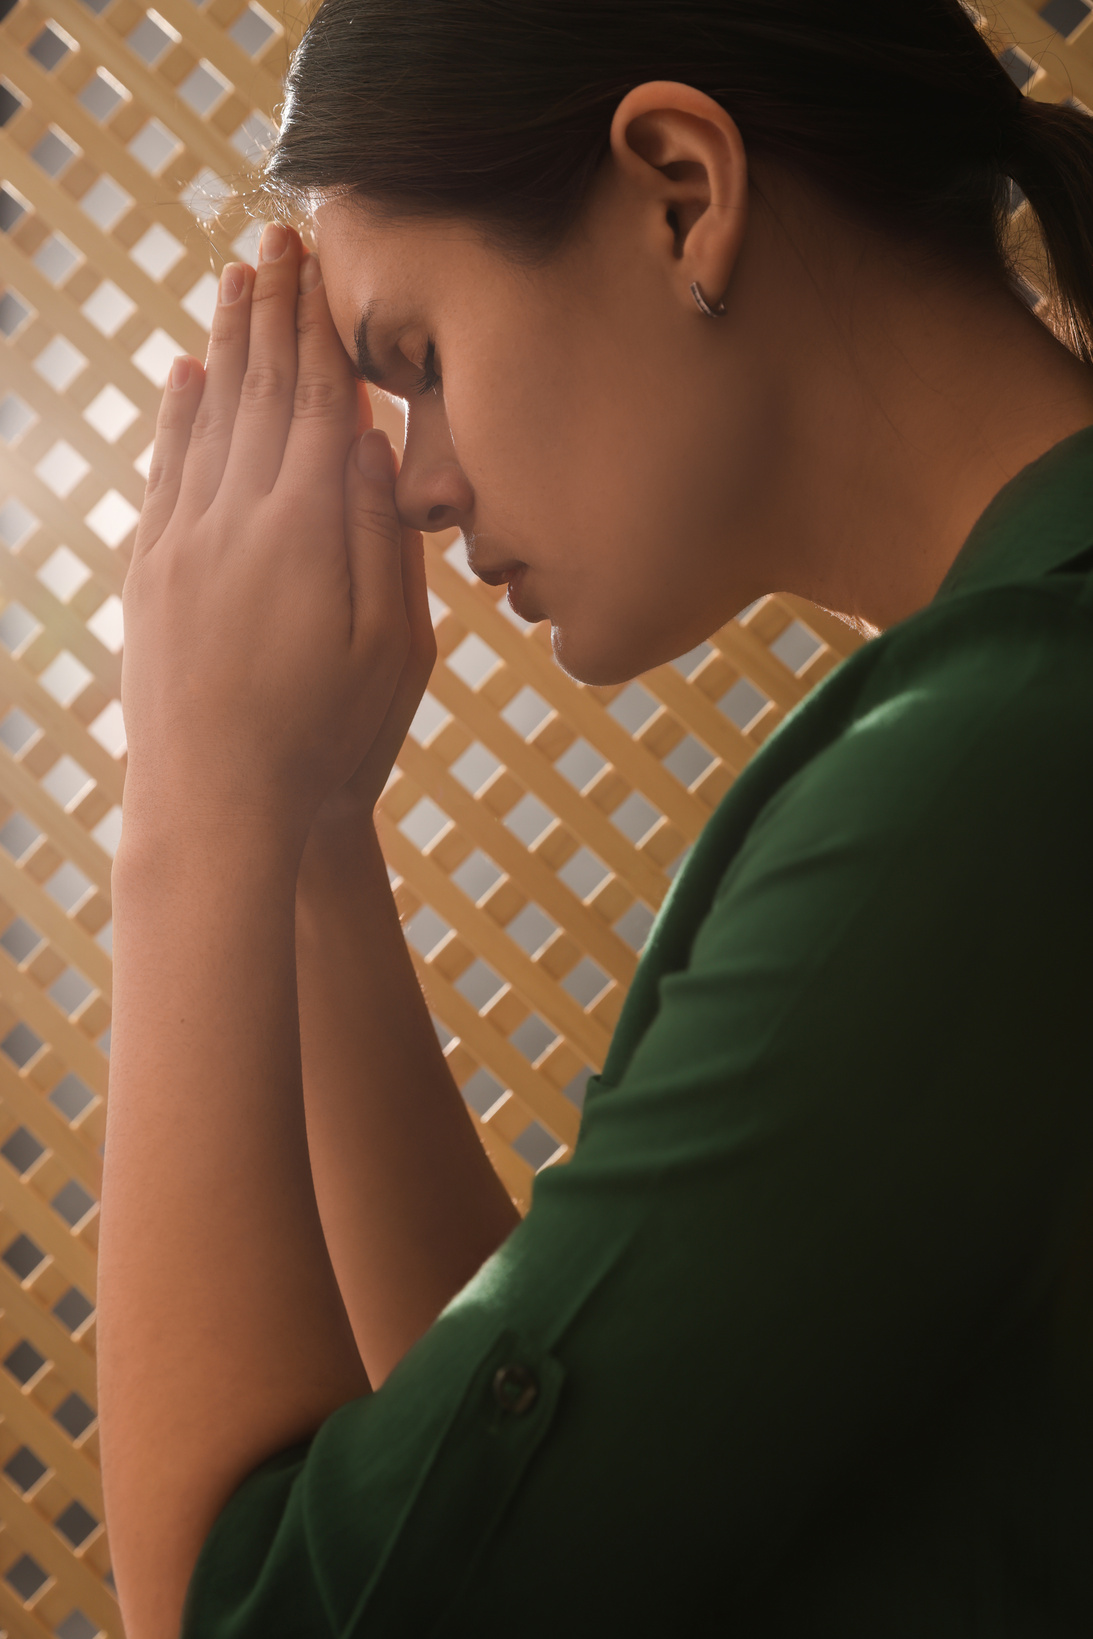 Woman Praying to God during Confession in Booth